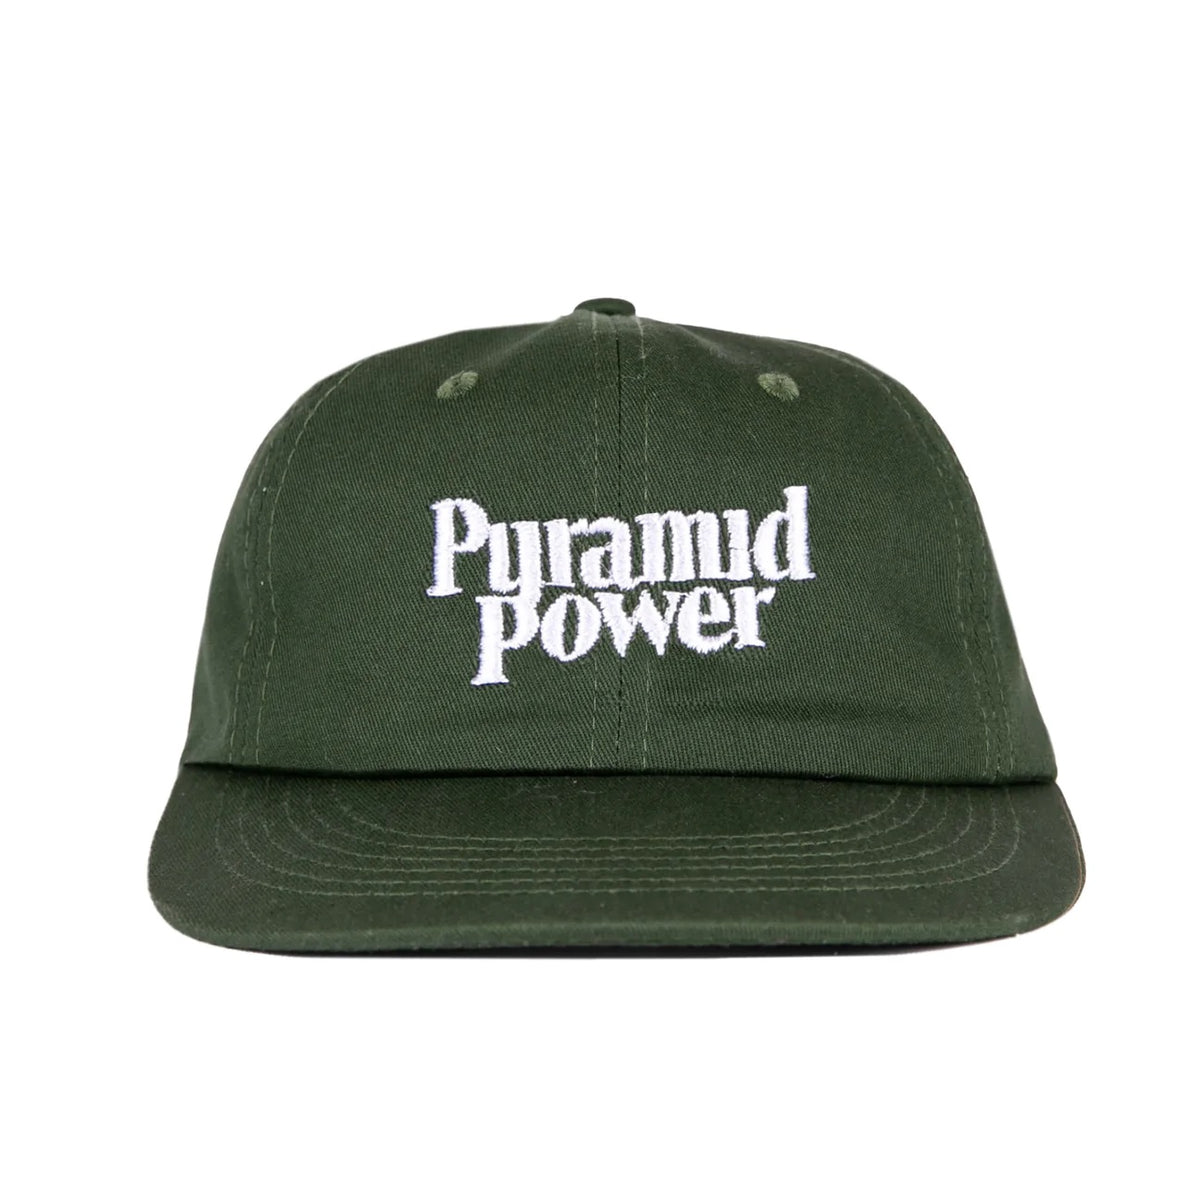 CERTIFIED PYRAMID POWER HAT